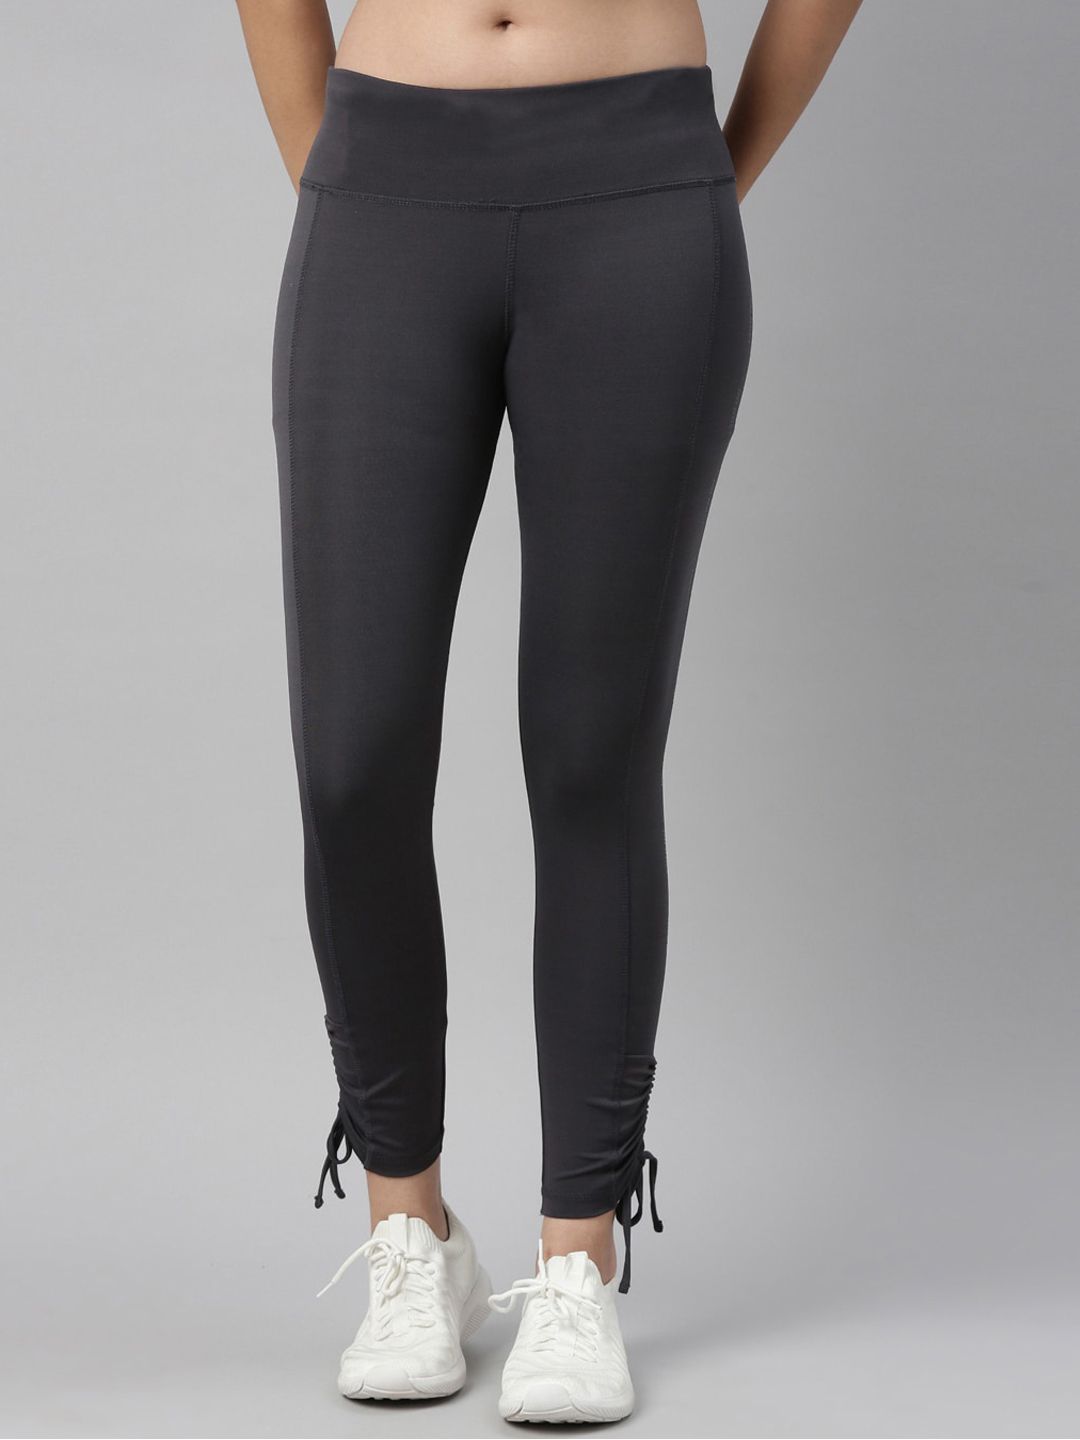 Proline Women Charcoal Grey Solid Tights Price in India